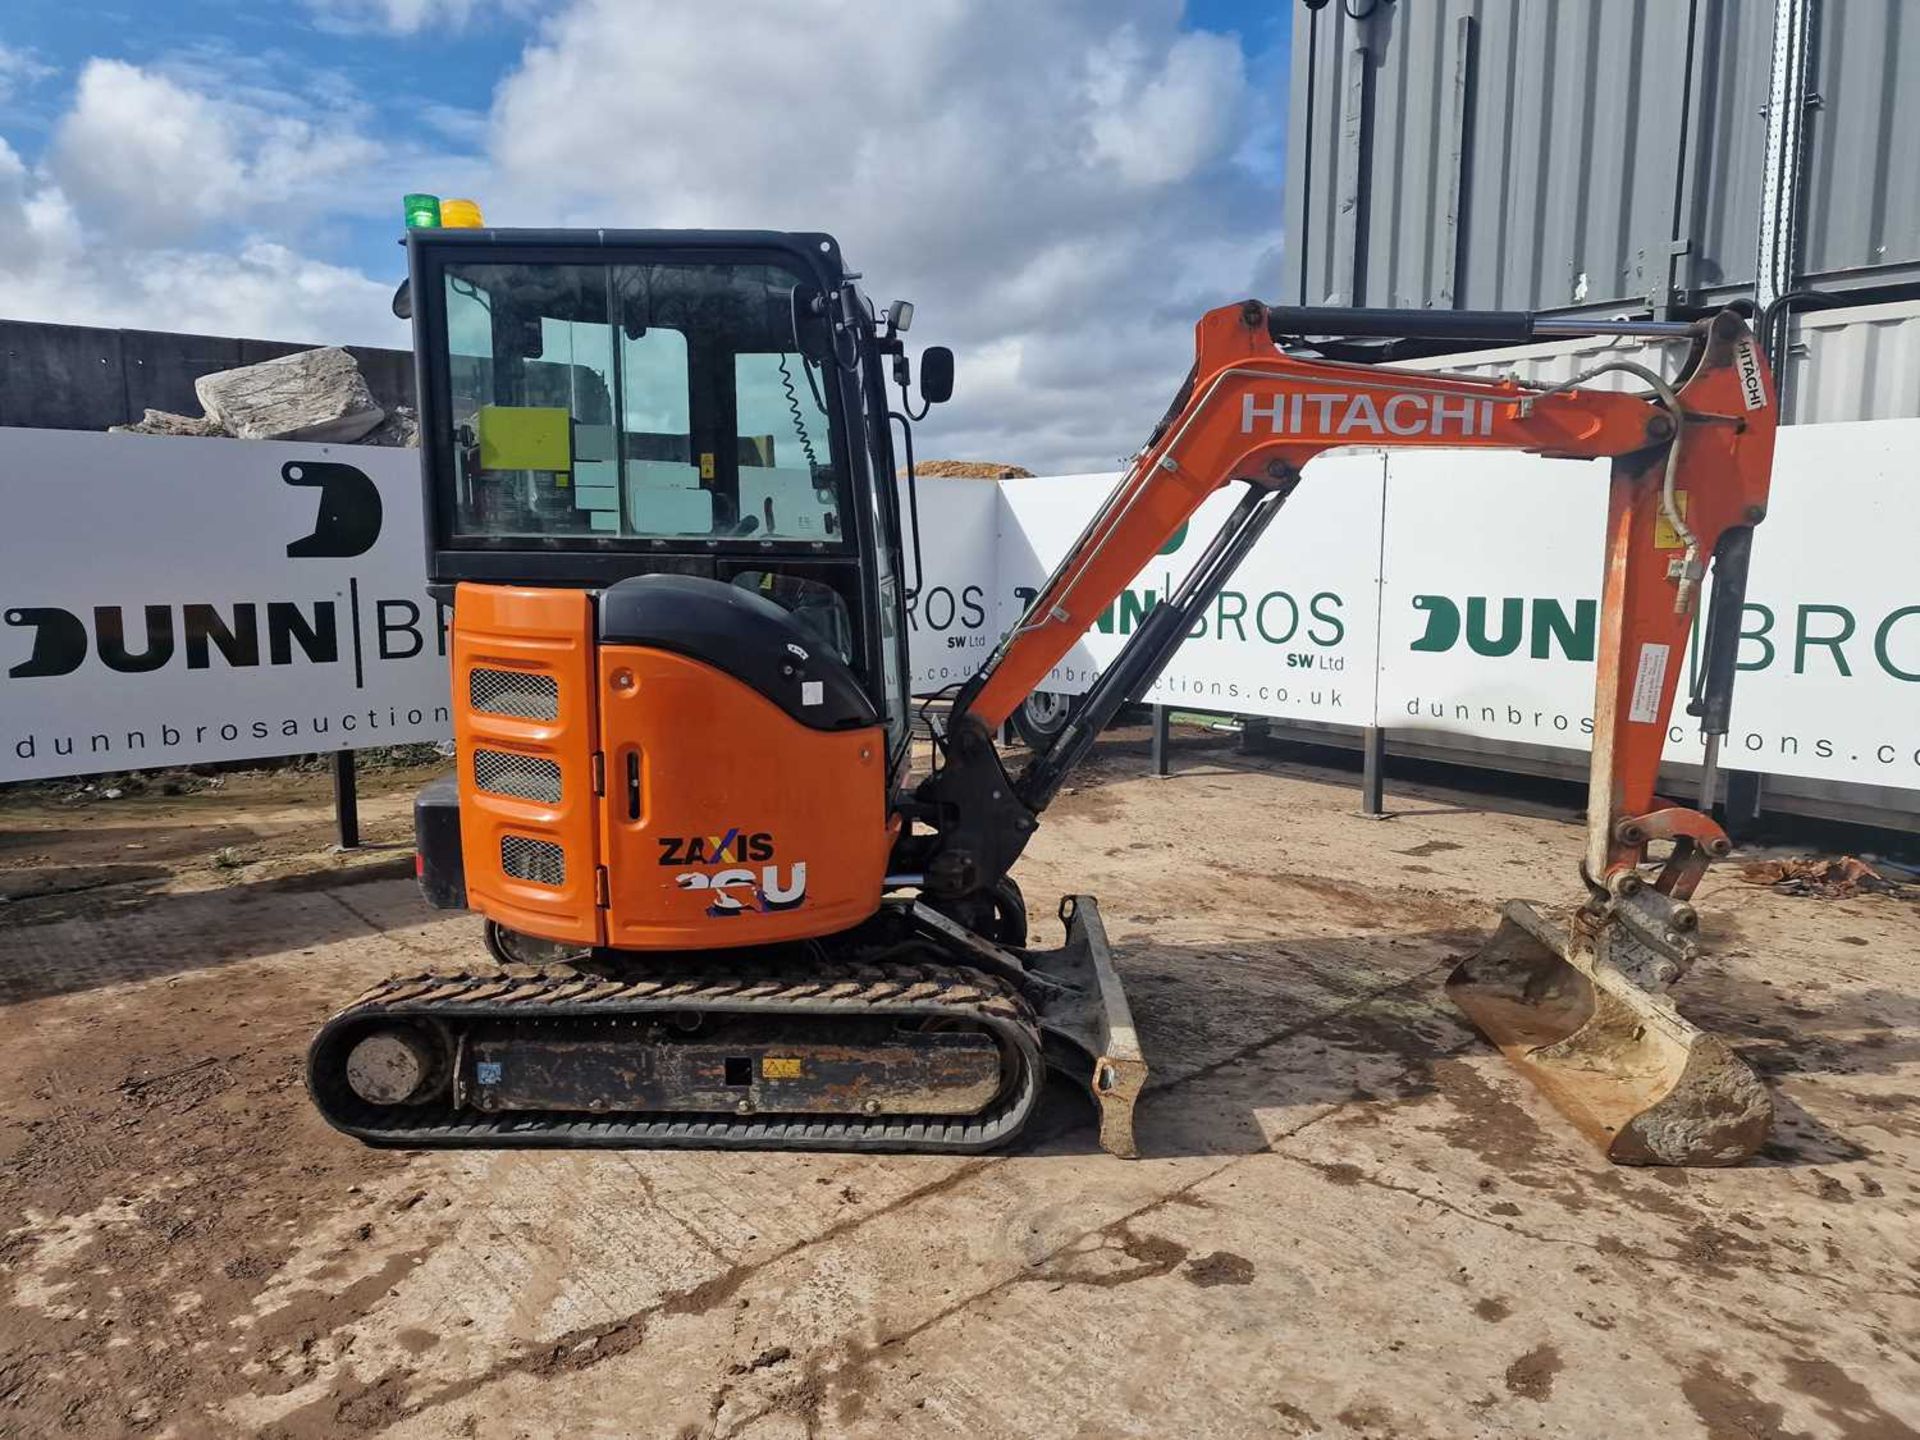 2019 Hitachi ZX26U-6 Rubber Tracks, Blade, Offset, Whites Manual QH, Piped, 48” Bucket - Image 5 of 66